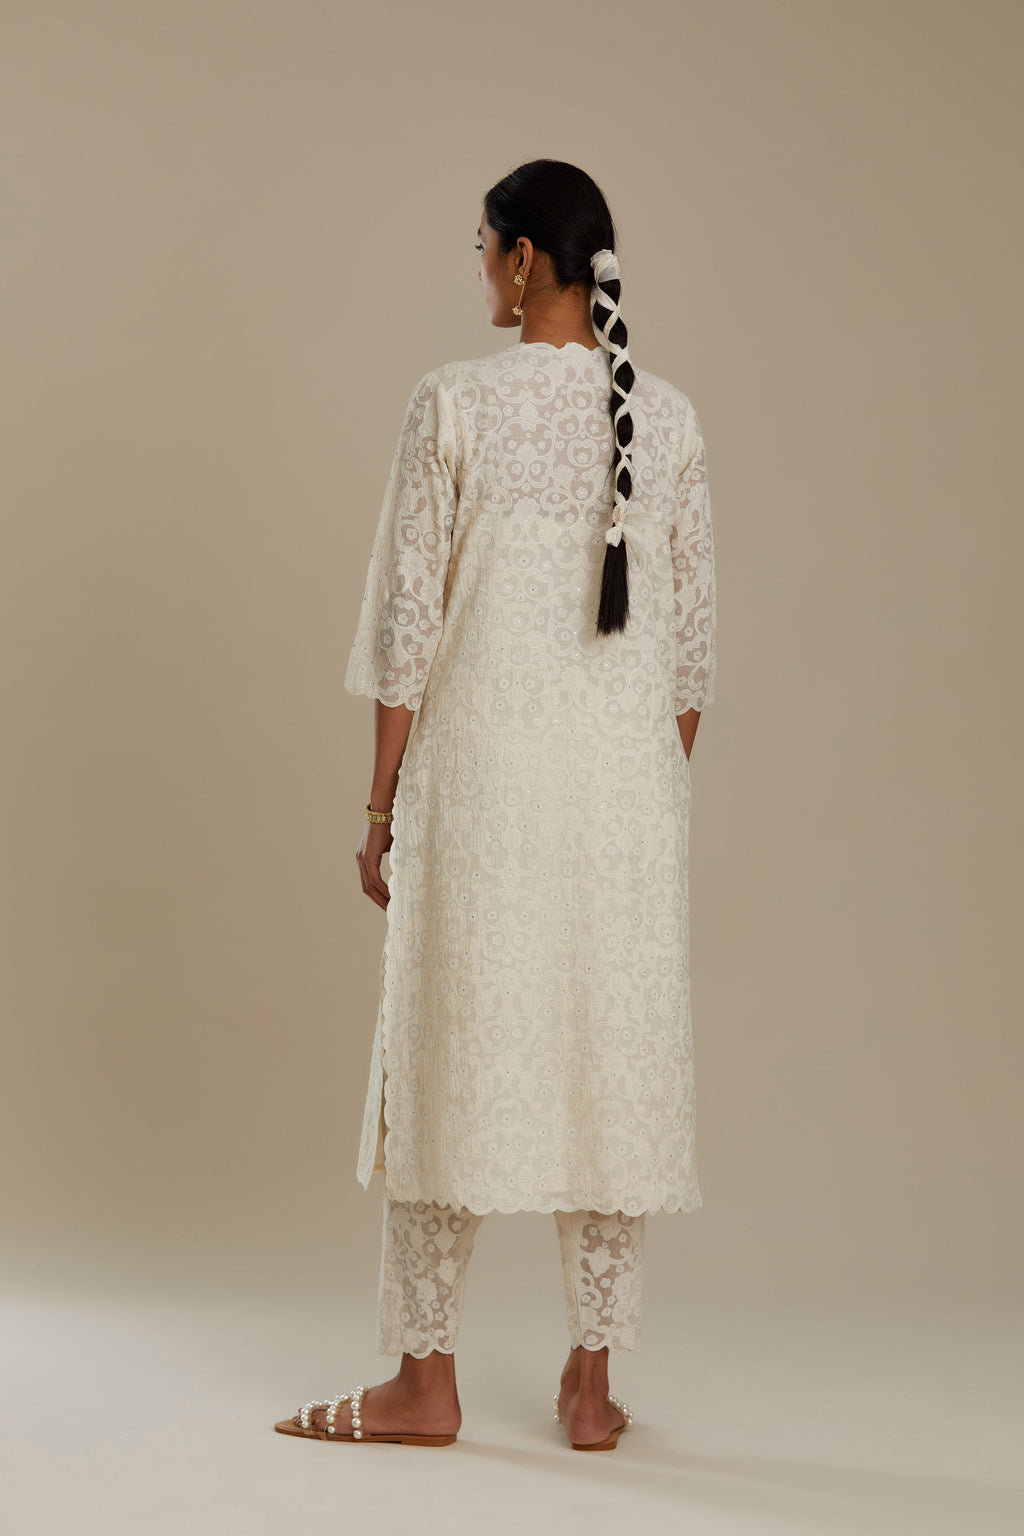 Off white straight kurta set with all-over cotton appliqué trellis jaal, highlighted with sequins.